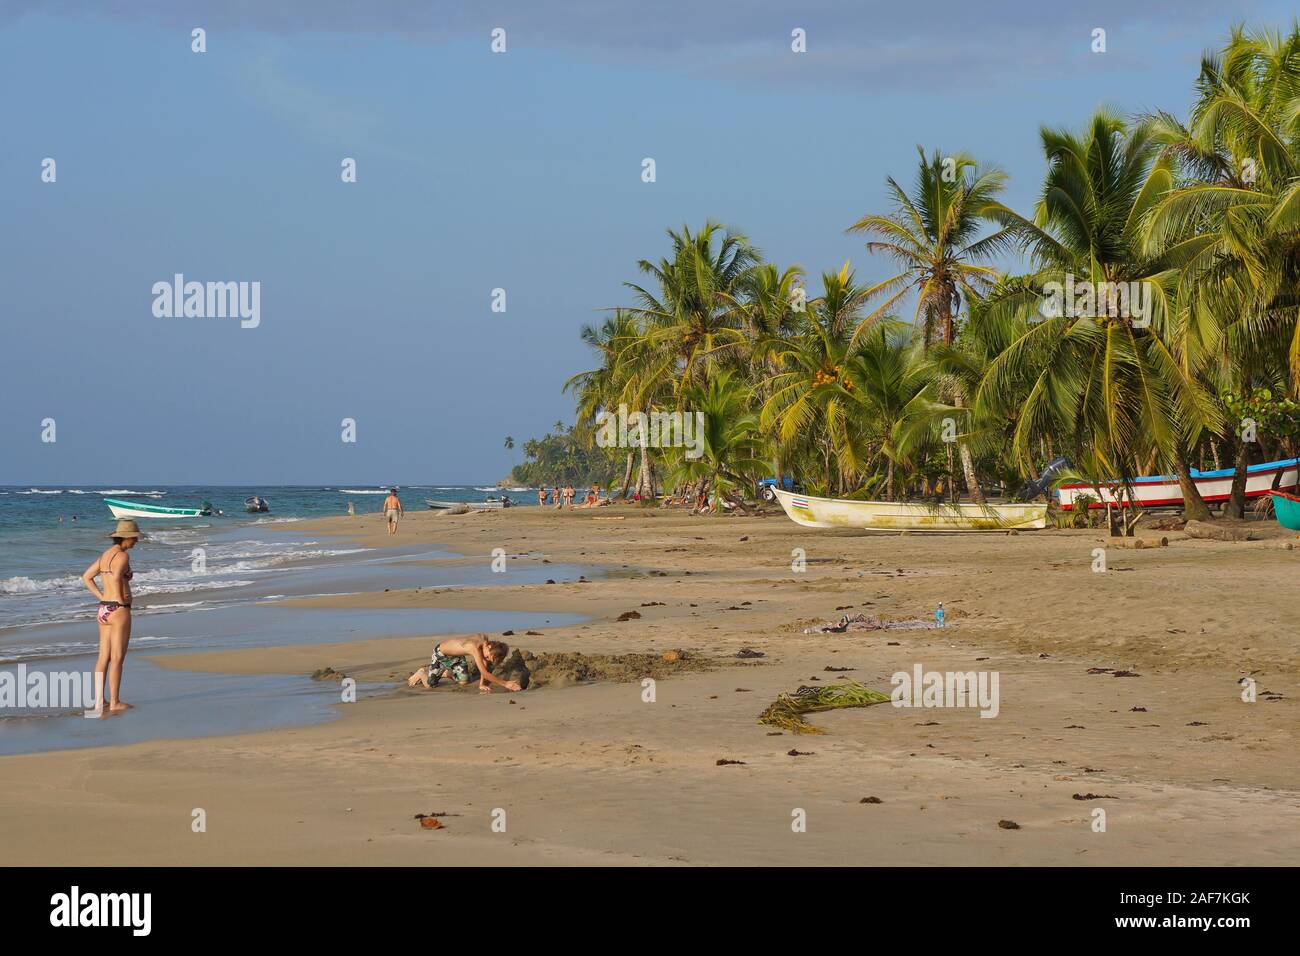 Costa Rica, tropical beach on the Caribbean coast with some tourists, Manzanillo, Limon province, Central America Stock Photo